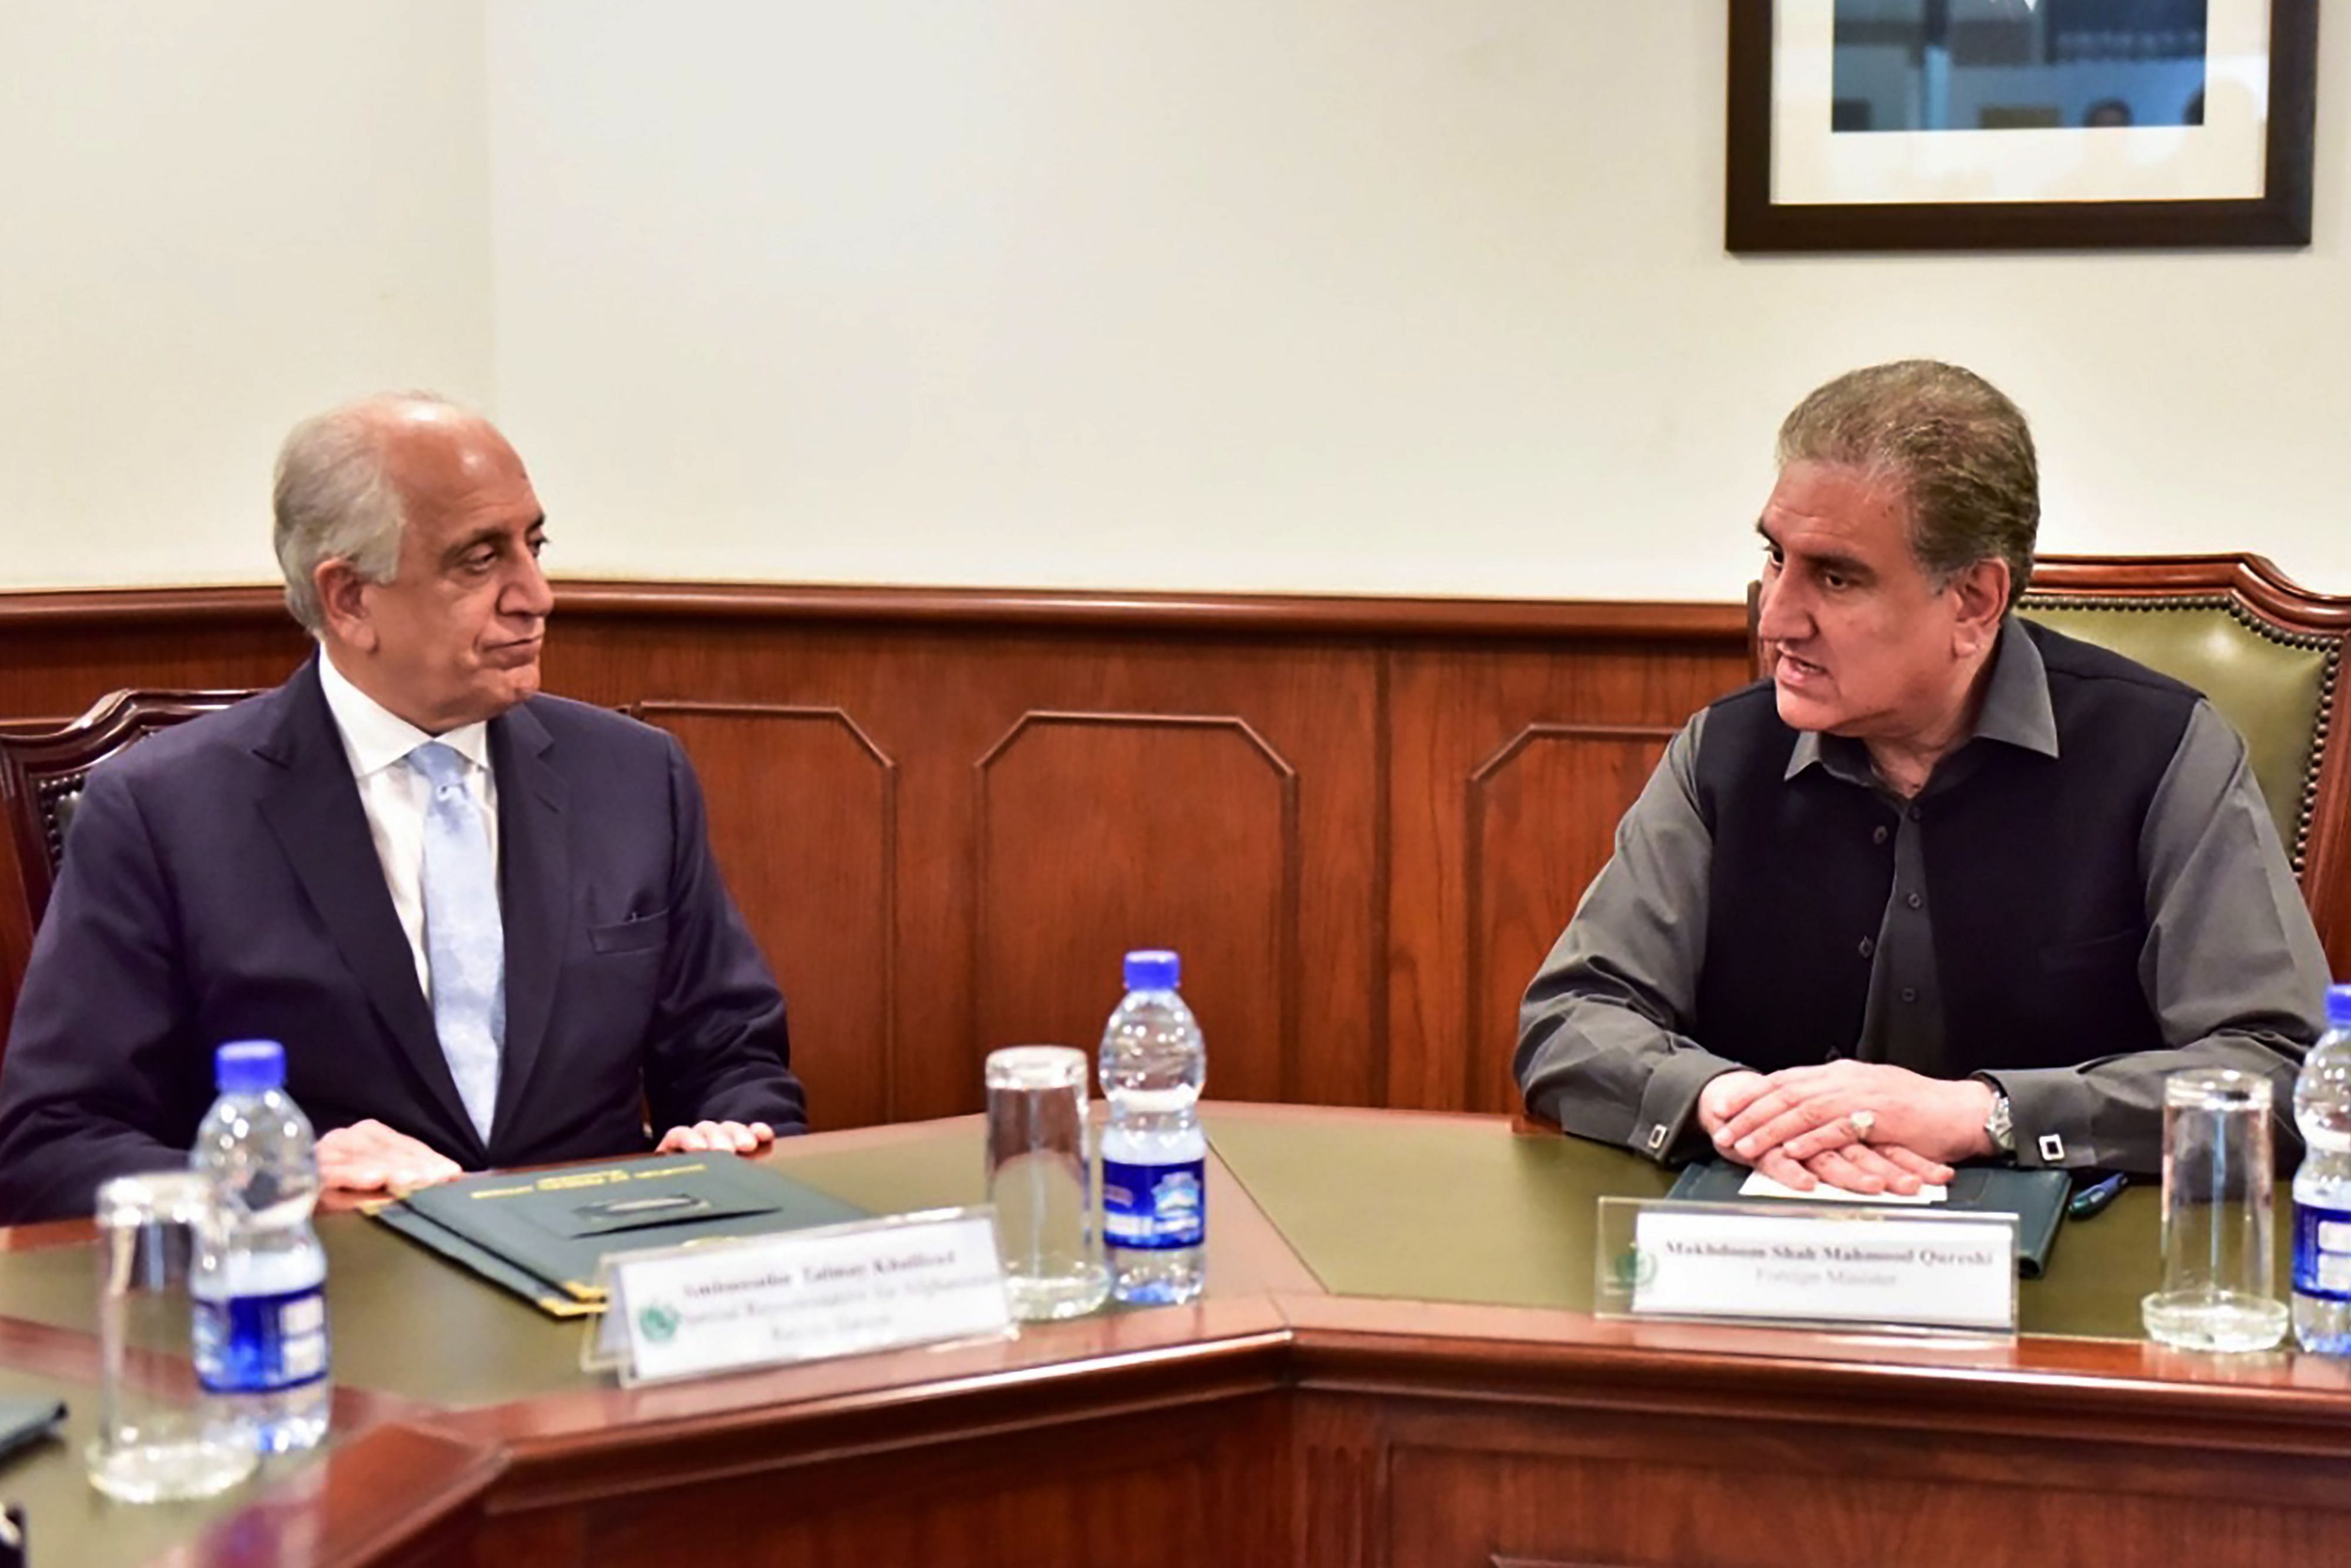 Pakistan's Foreign Minister Shah Mahmood Qureshi (R) speaks US envoy Zalmay Khalilzad, the US Special Representative for Afghanistan Reconciliation, at the Foreign Ministry in Islamabad. (AFP Photo)